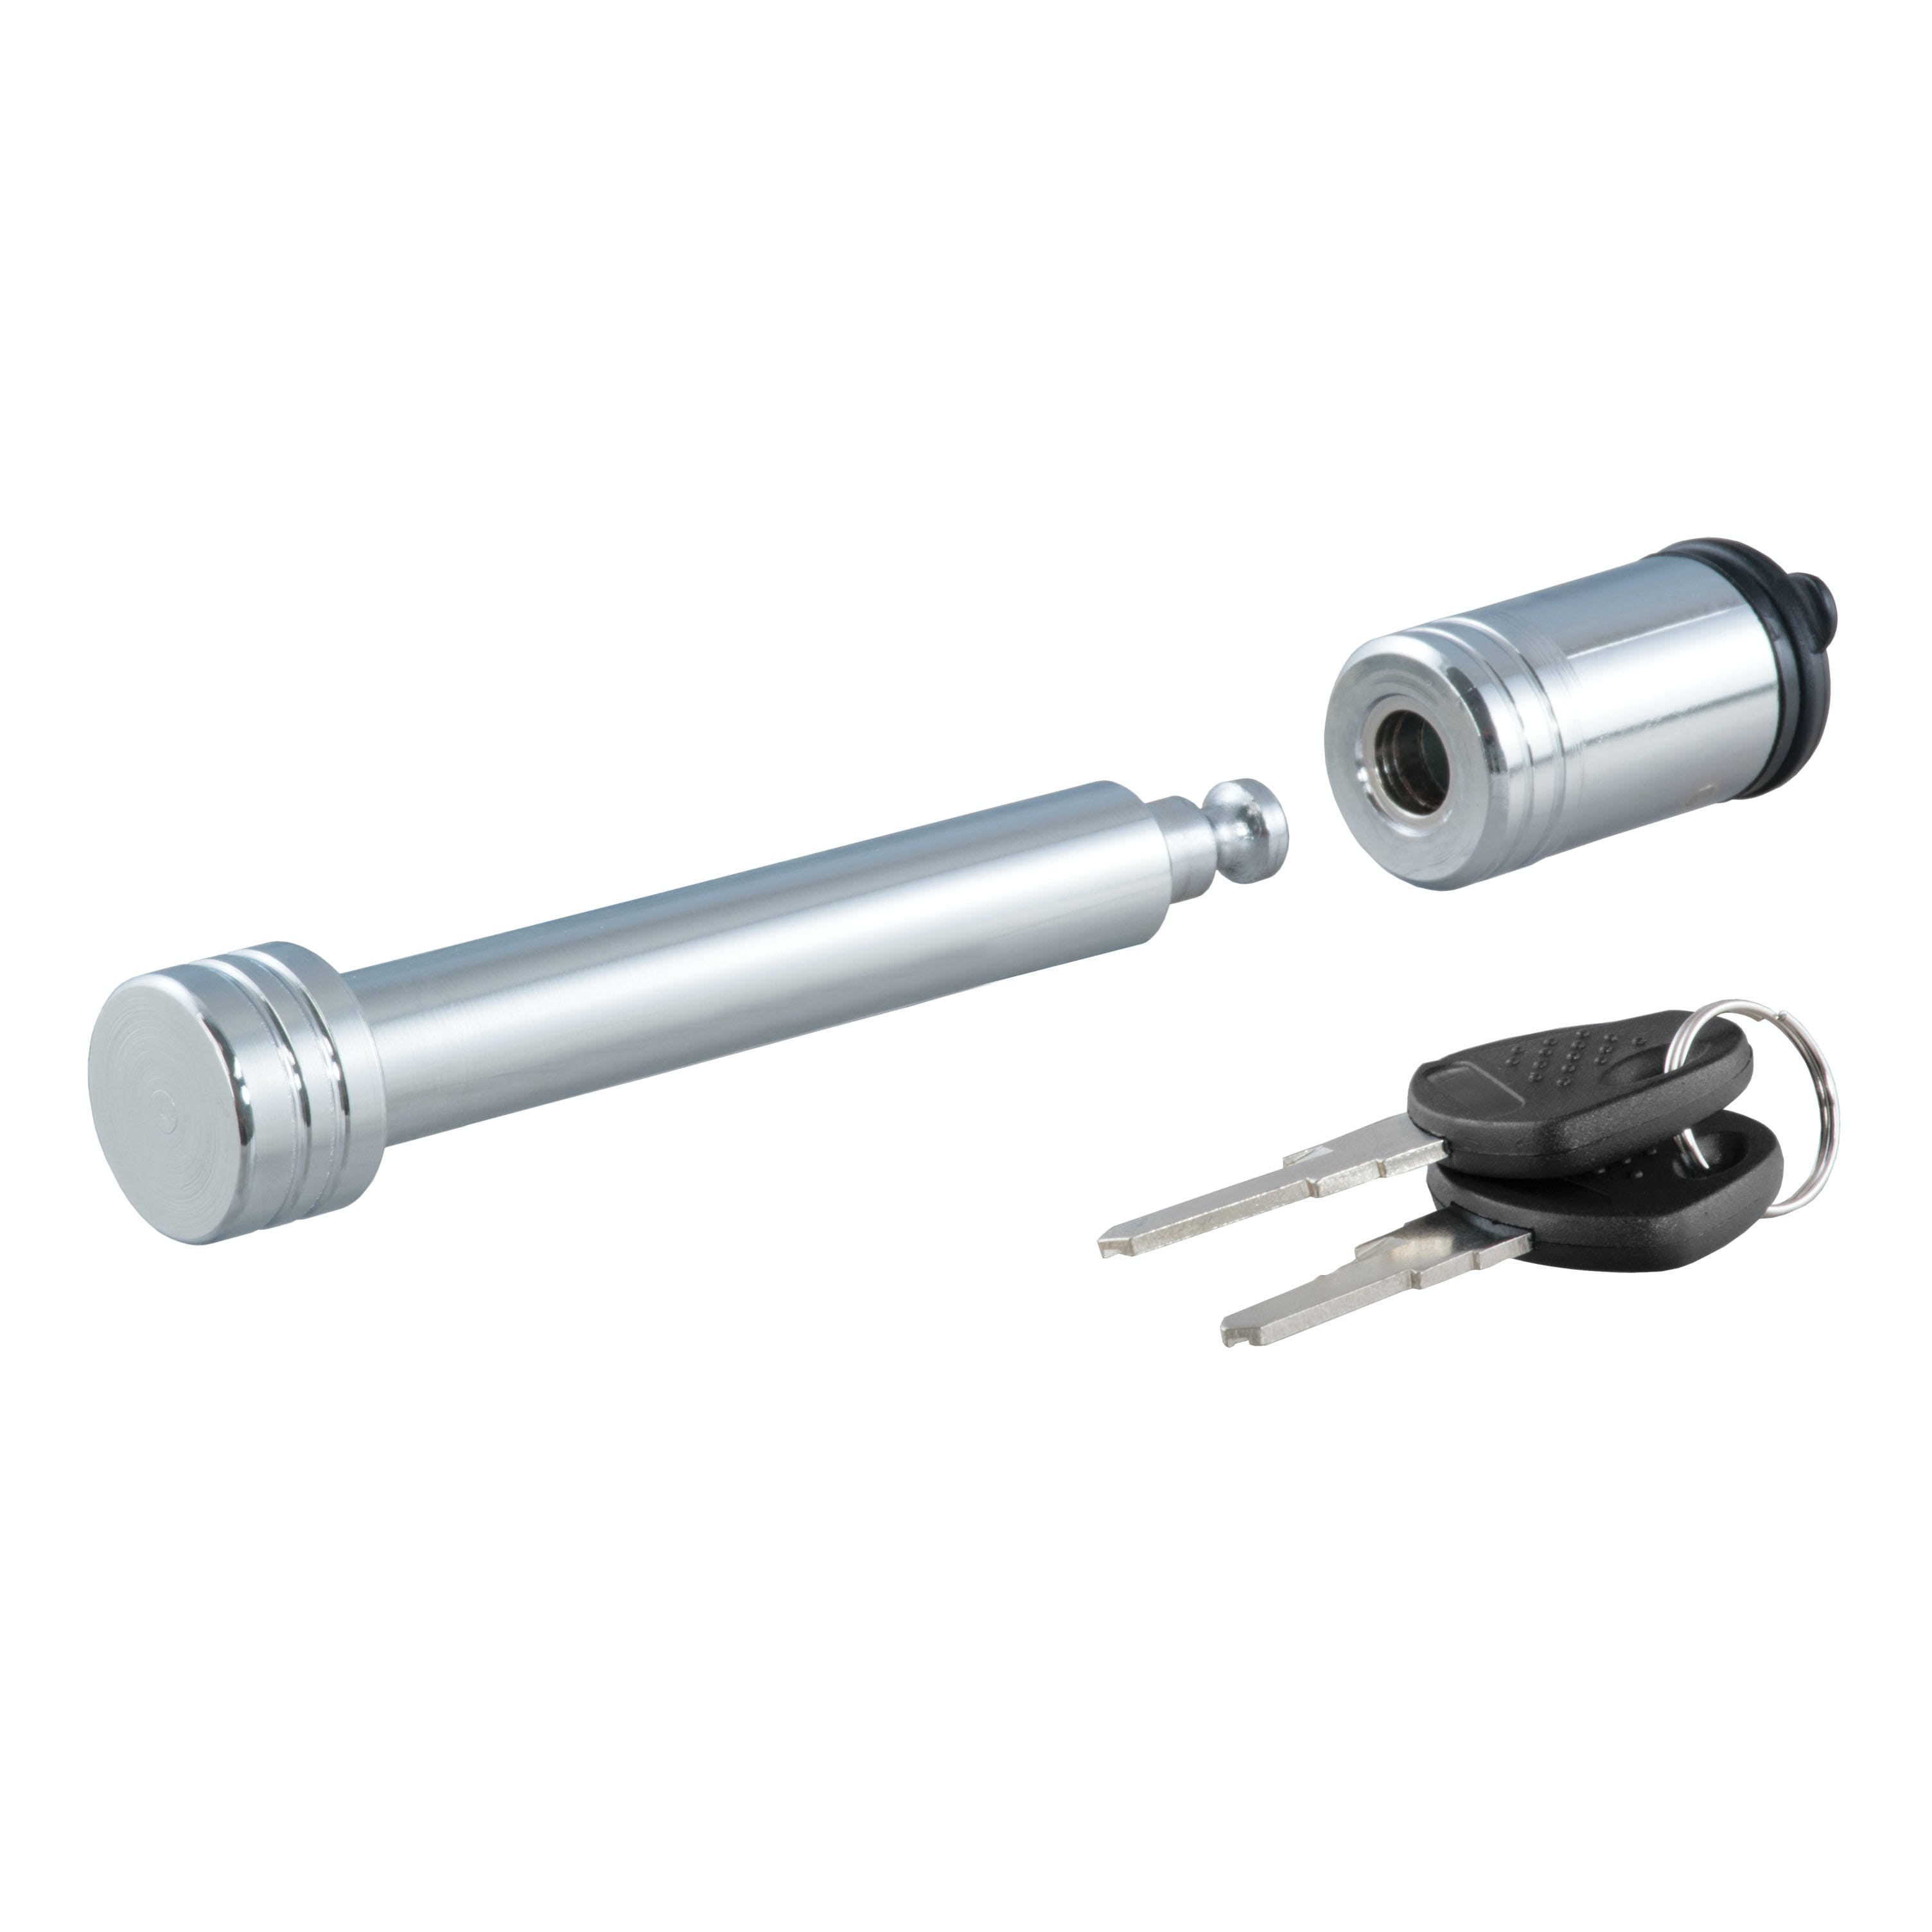 CURT 23519 5/8 Hitch Lock (2 or 2-1/2 Receiver, Barbell, Stainless)